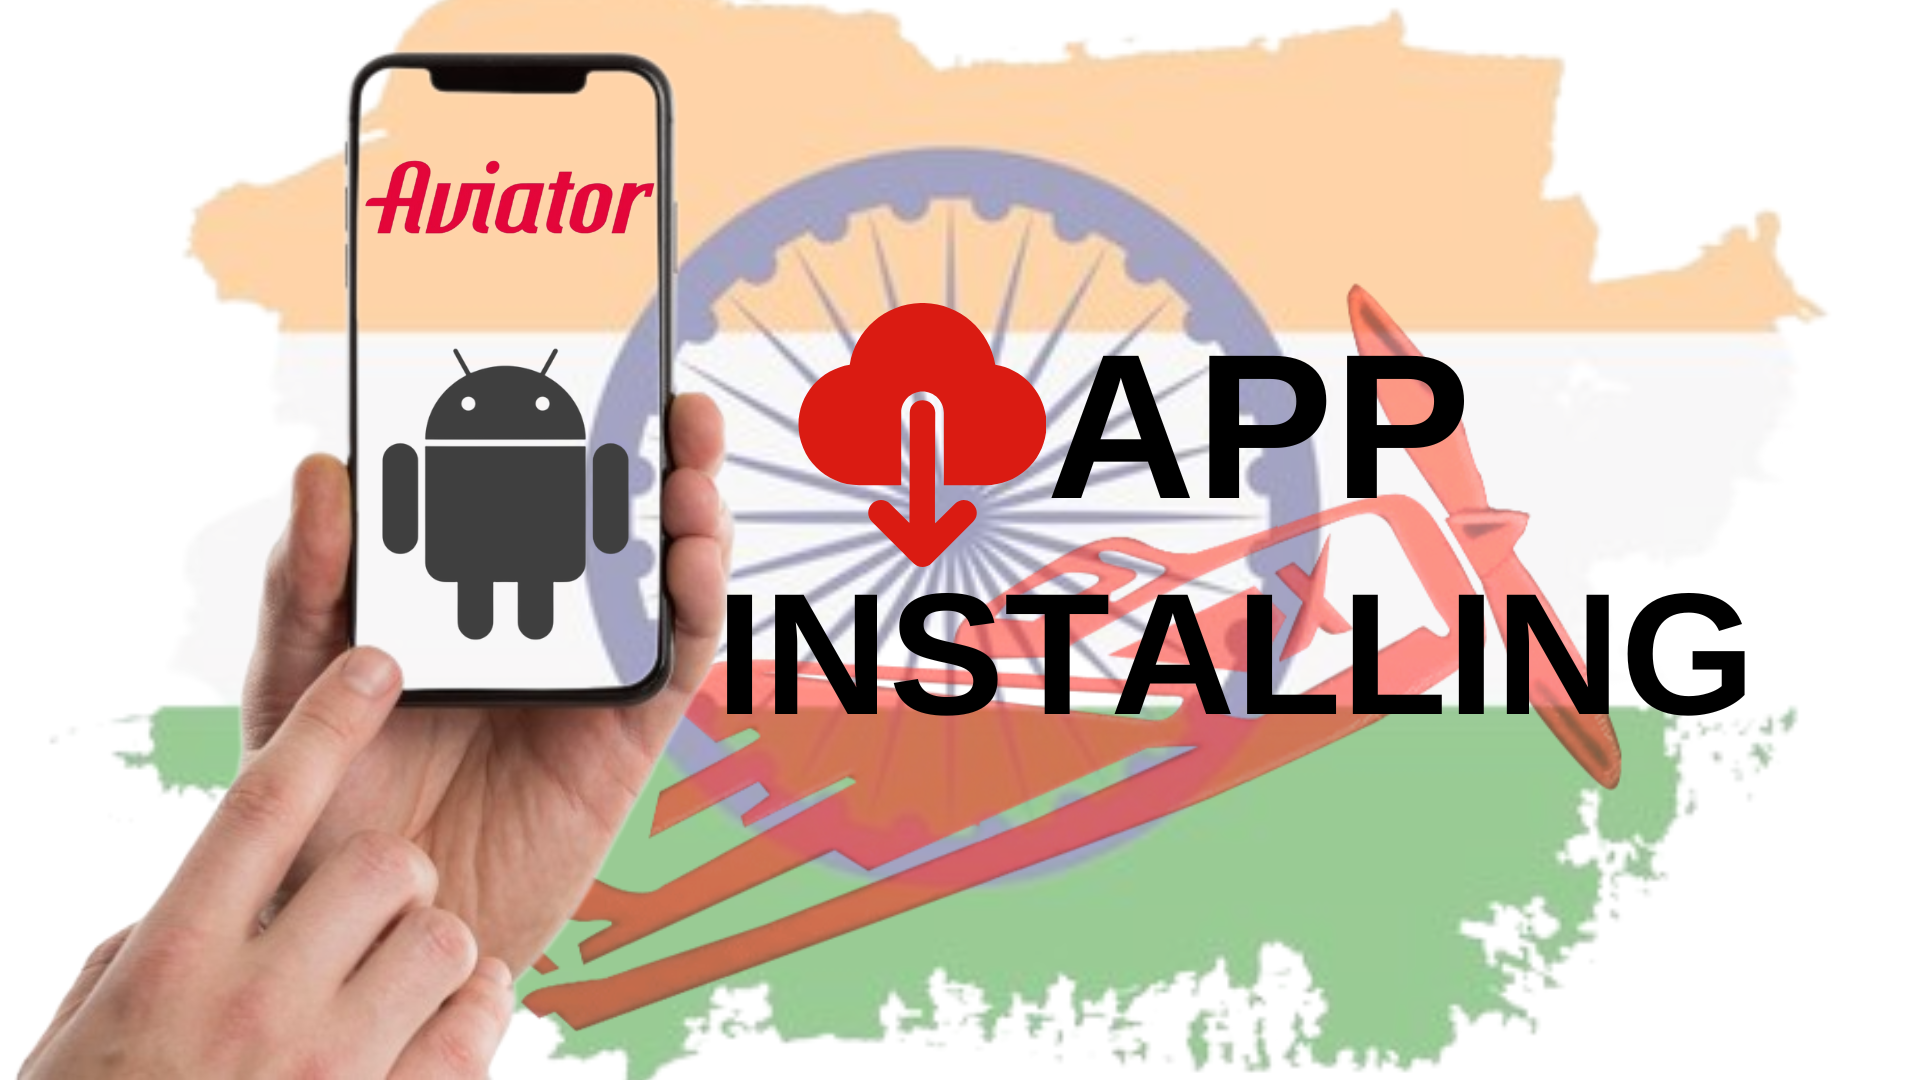 A hand holding an Android phone with text 'App installing', and Indian flag background